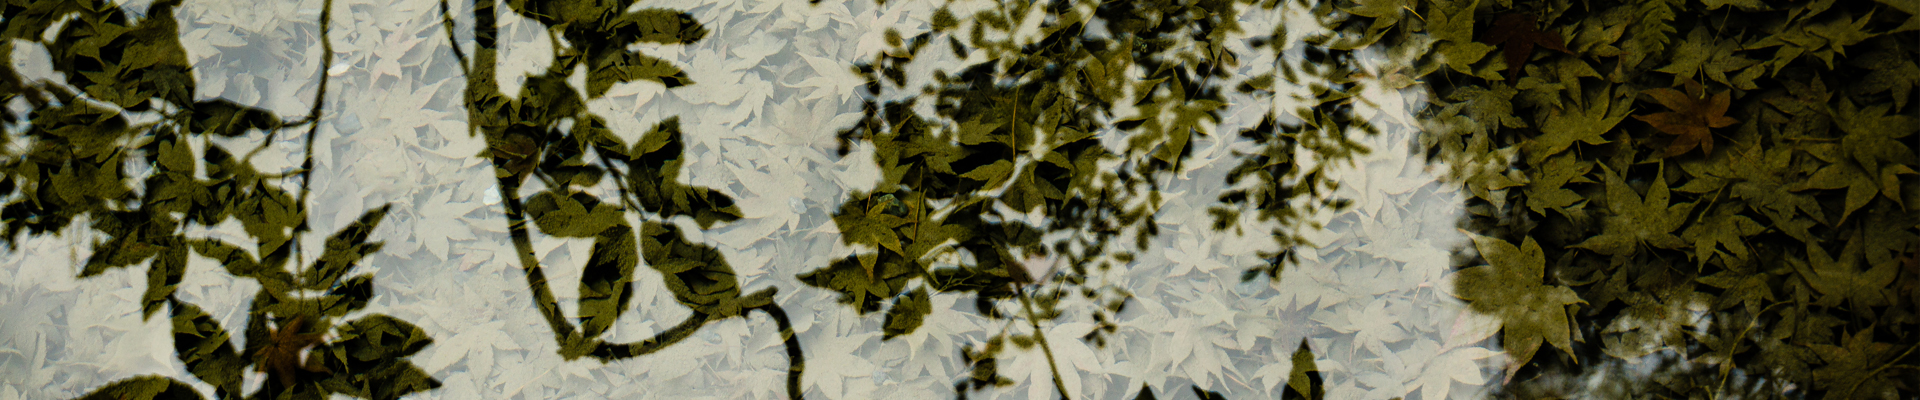 leaves reflection cropped